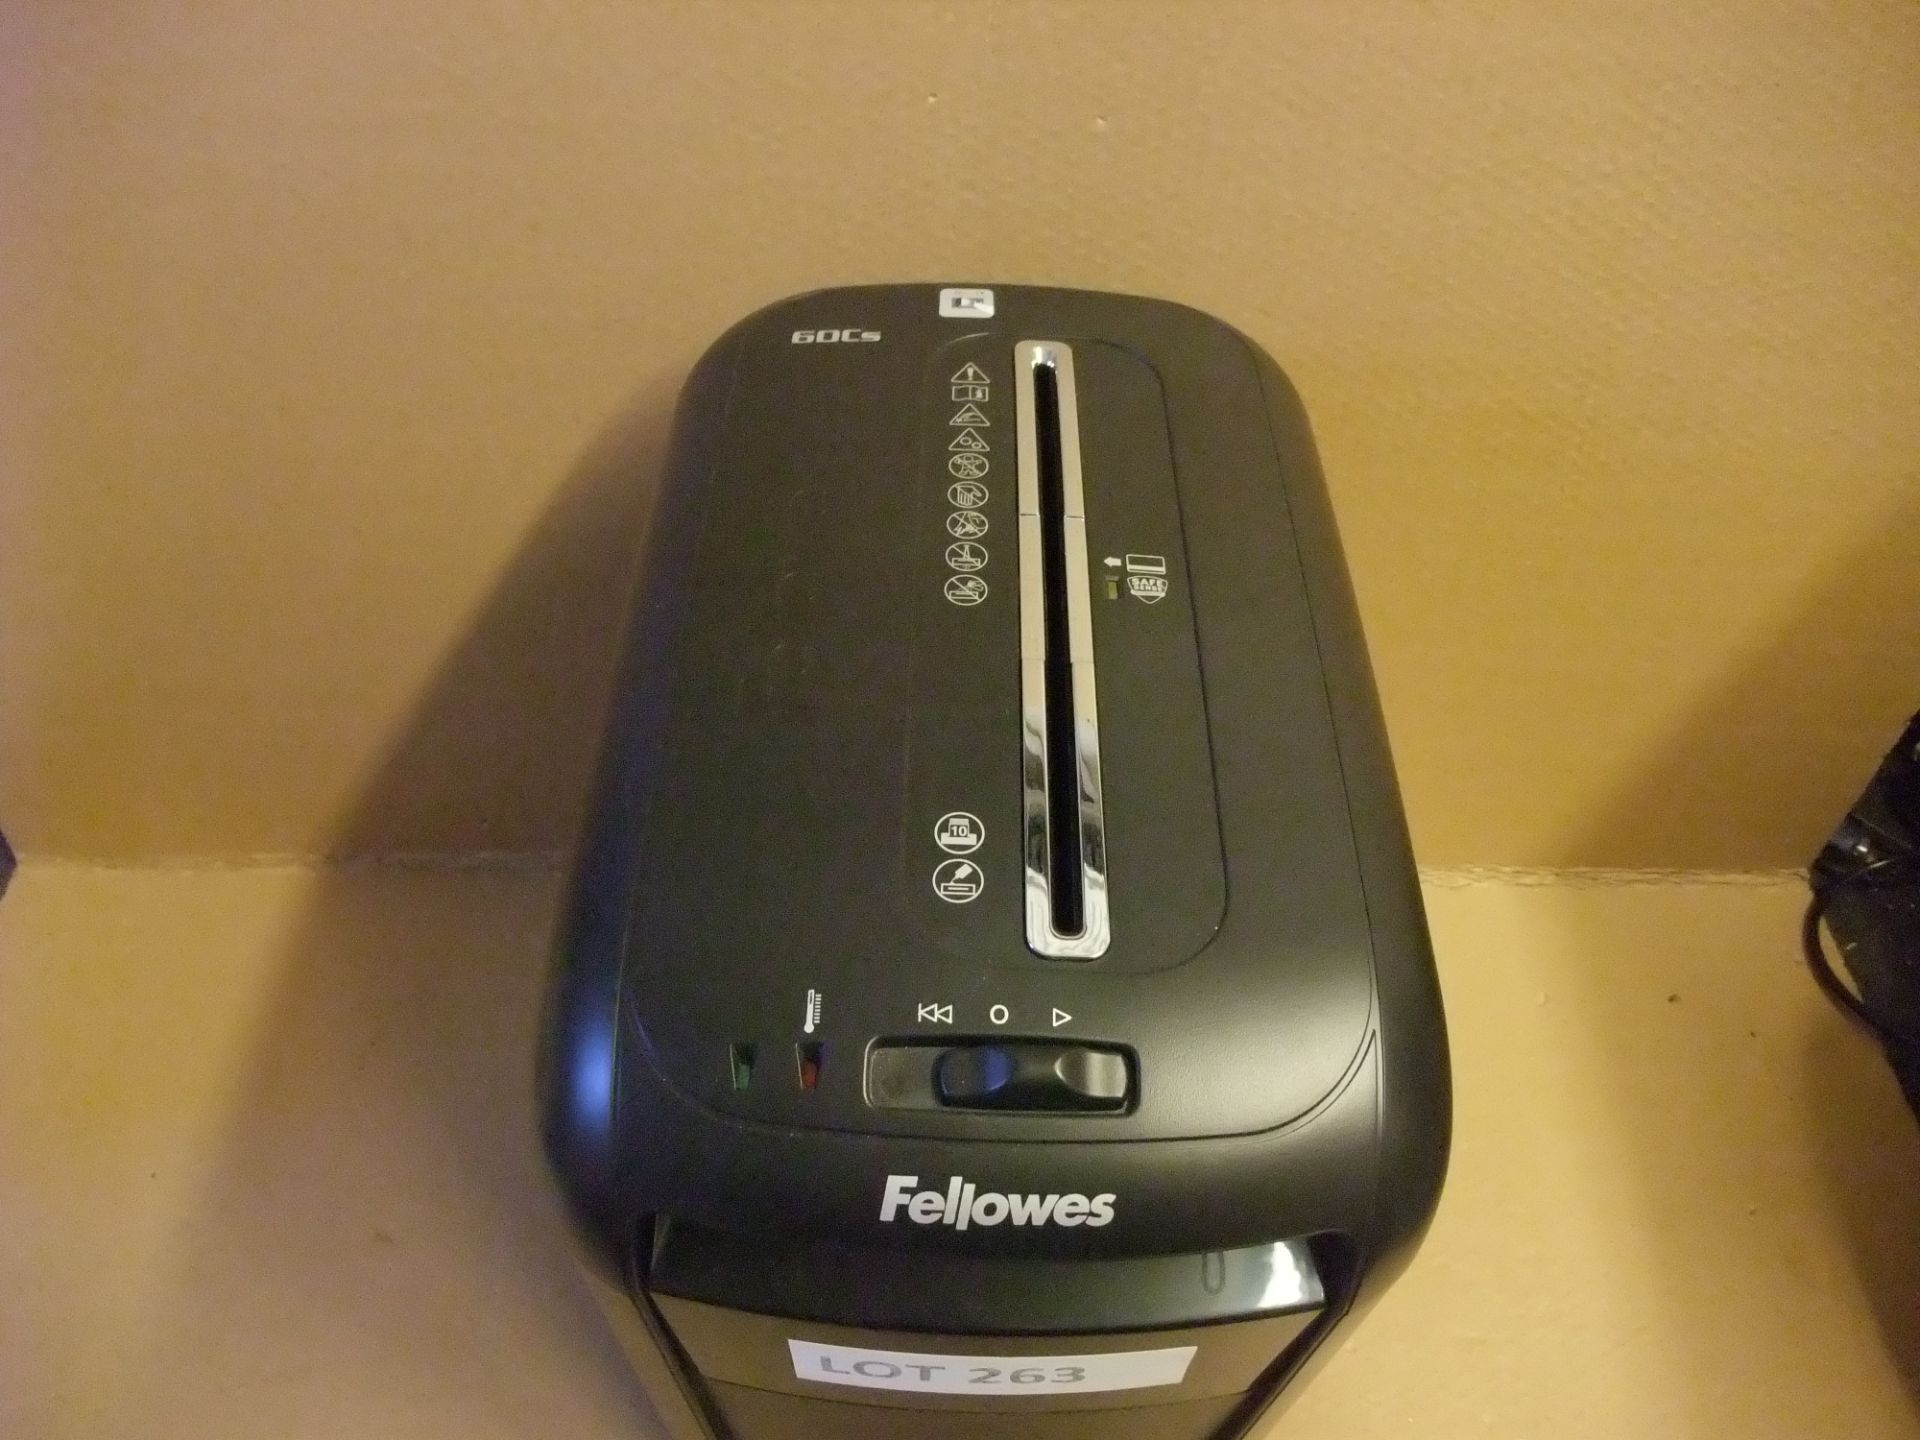 Fellowes 60Cs Cross-Cut ShredderPlease read the following important notes:- All lots must be cleared - Image 2 of 2